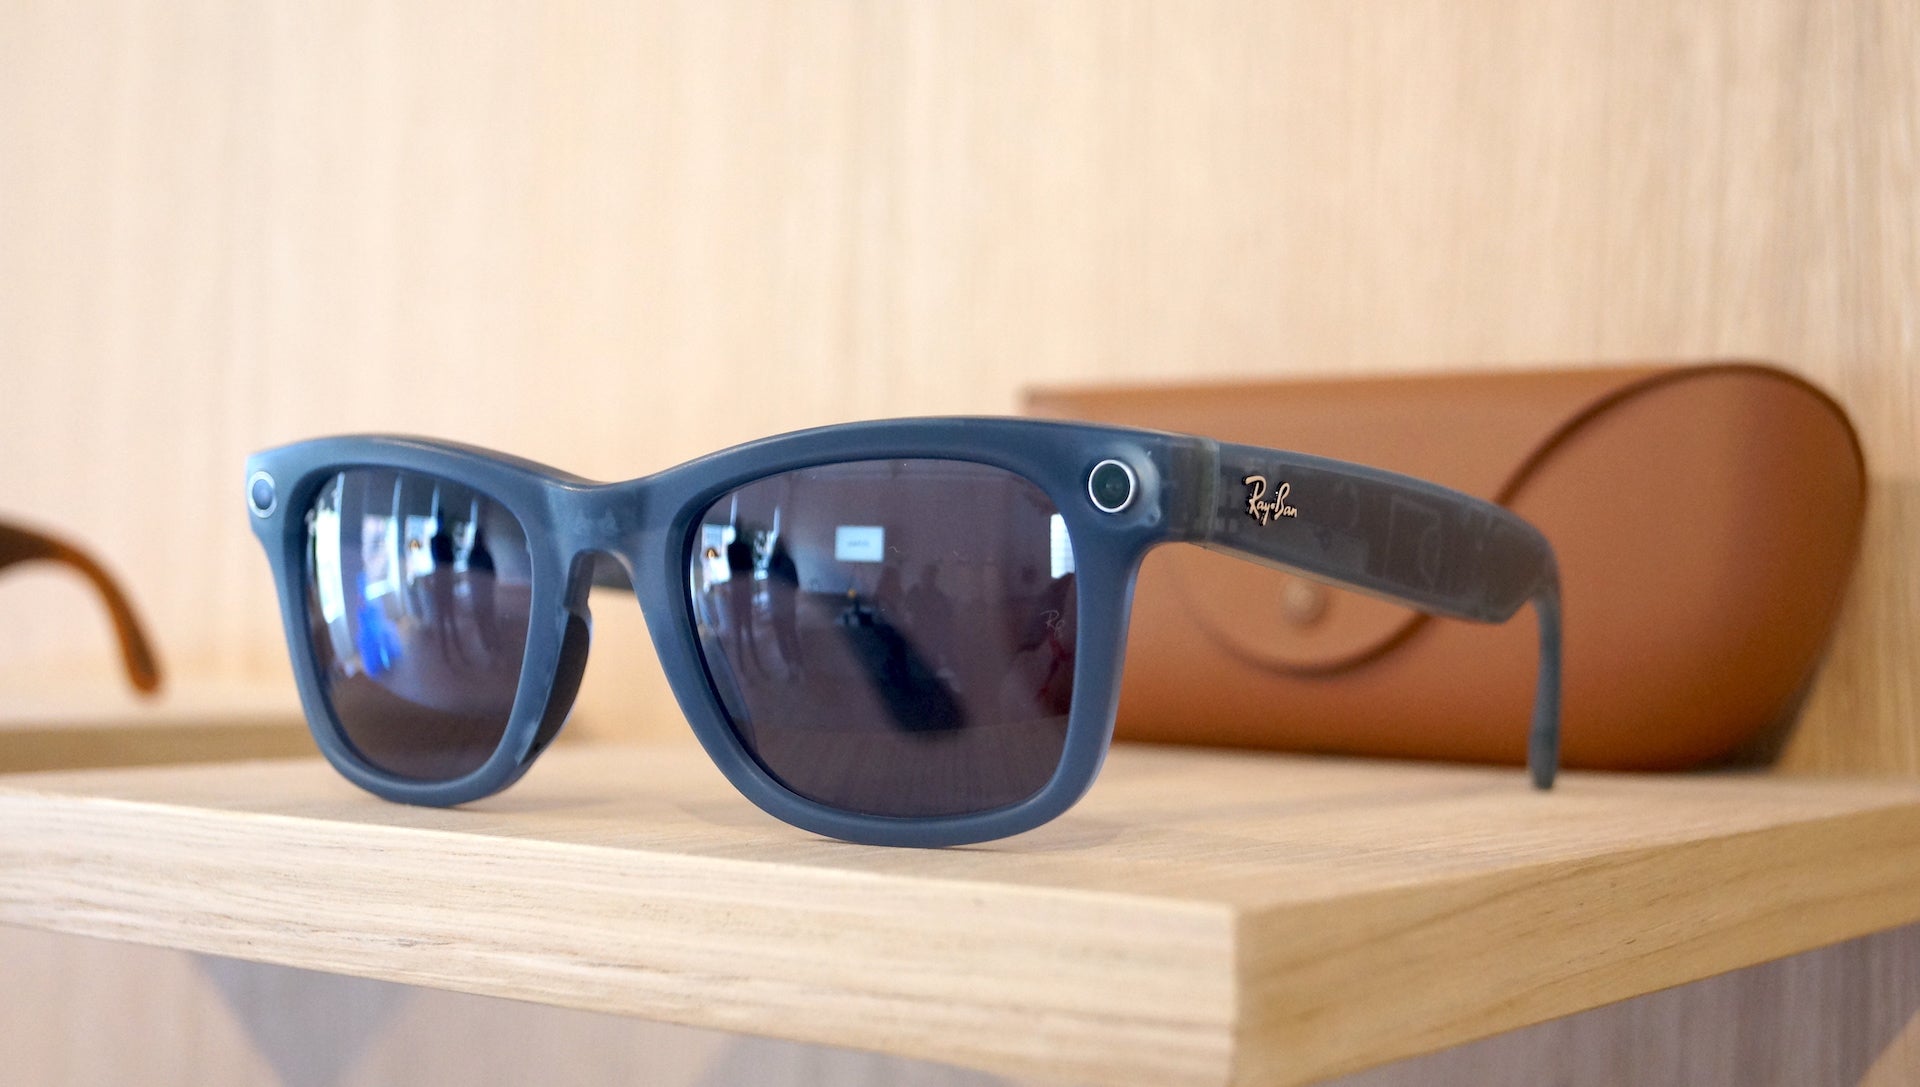 Left ImageRay-Ban sunglasses on wooden shelf with case in background